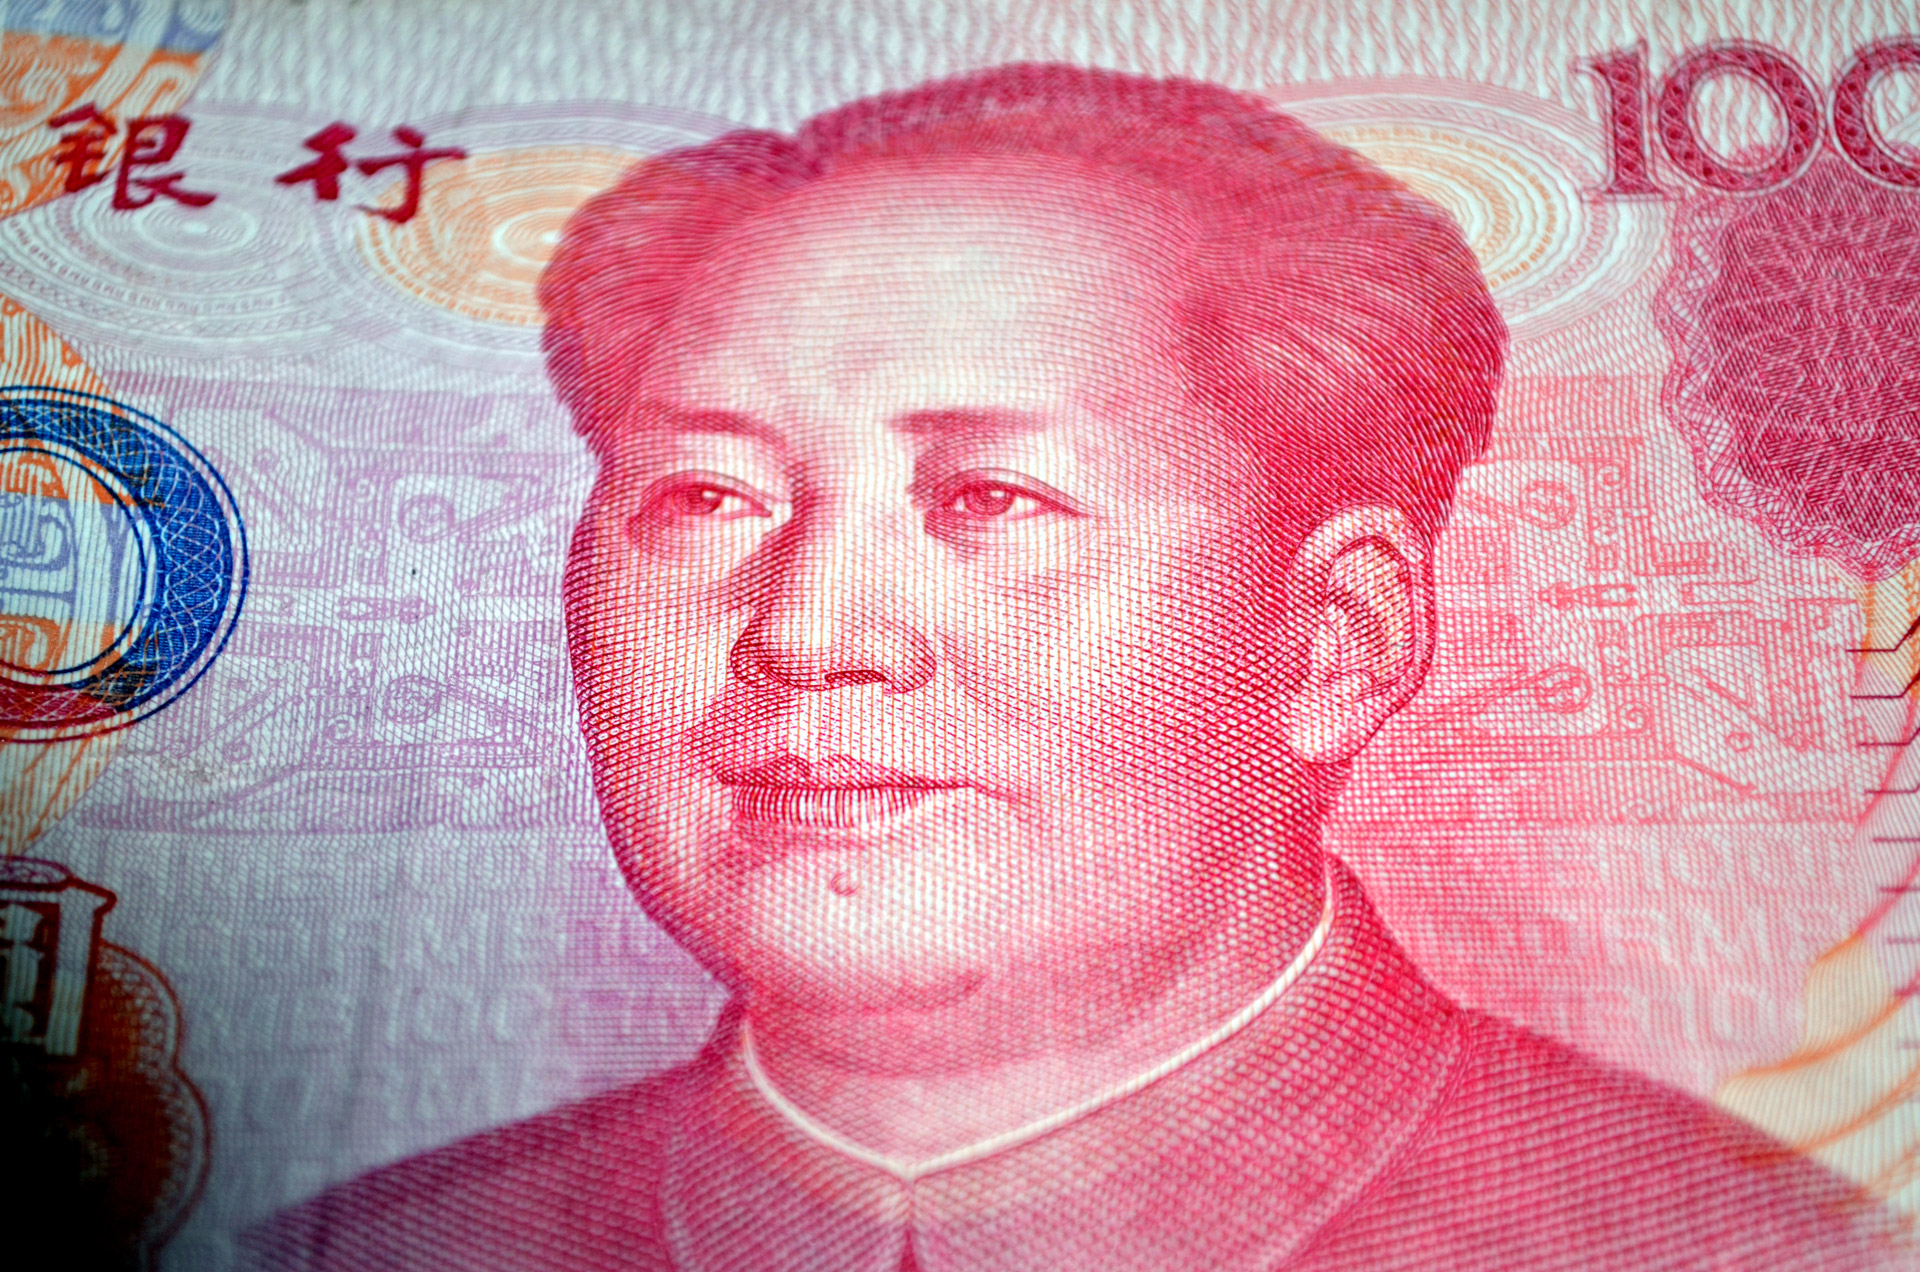 Mao Zedong Free Stock Photo - Public Domain Pictures